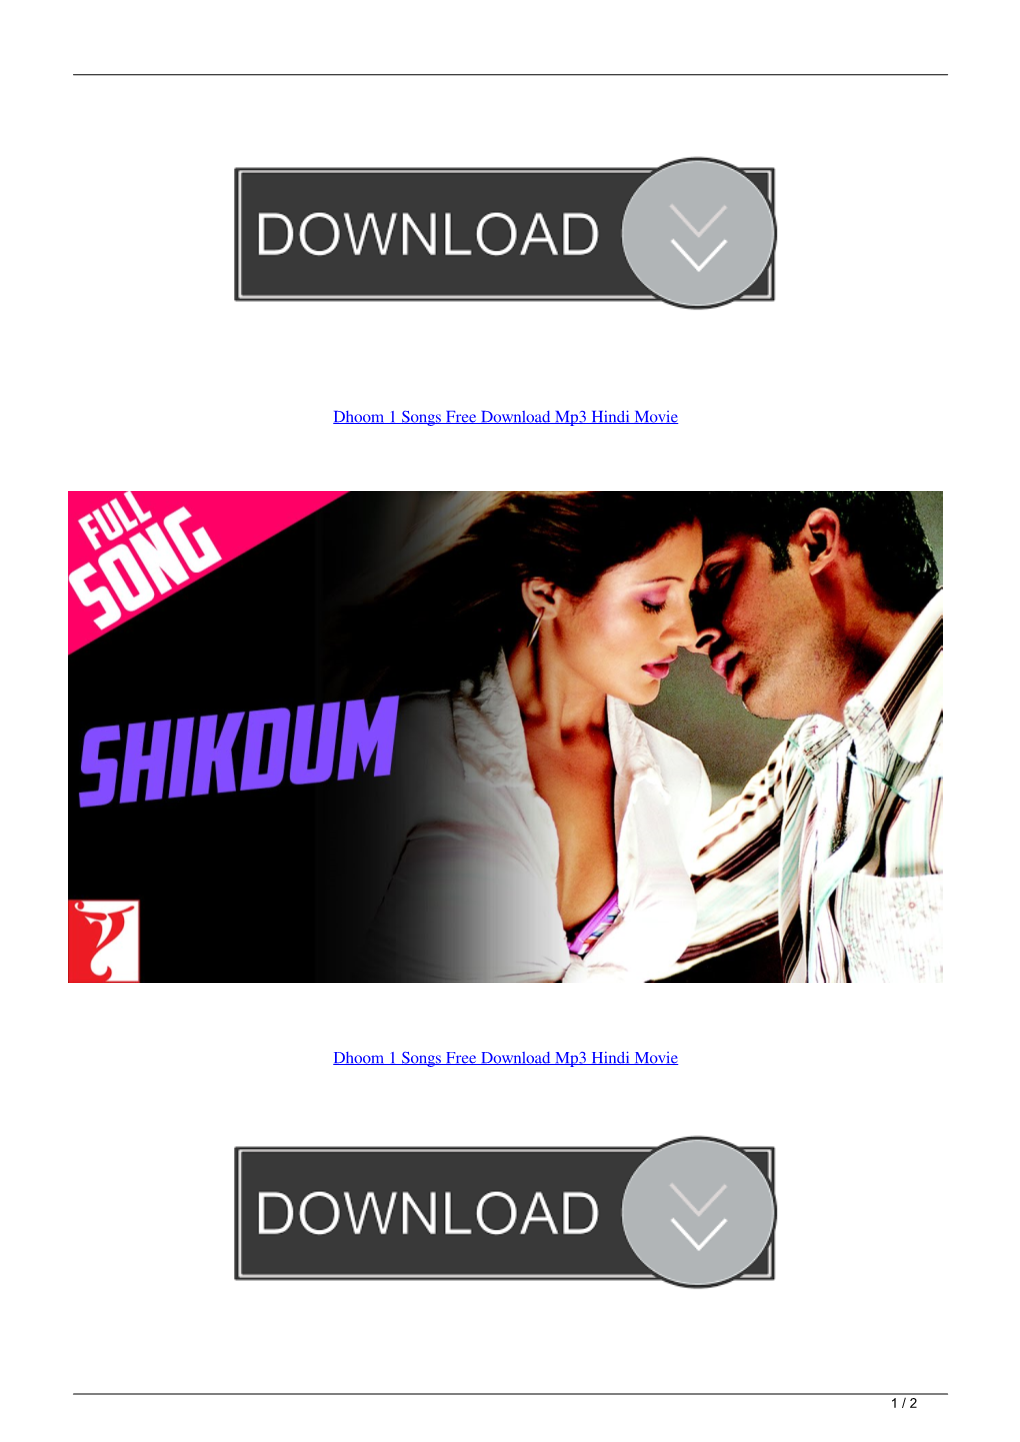 Dhoom 1 Songs Free Download Mp3 Hindi Movie